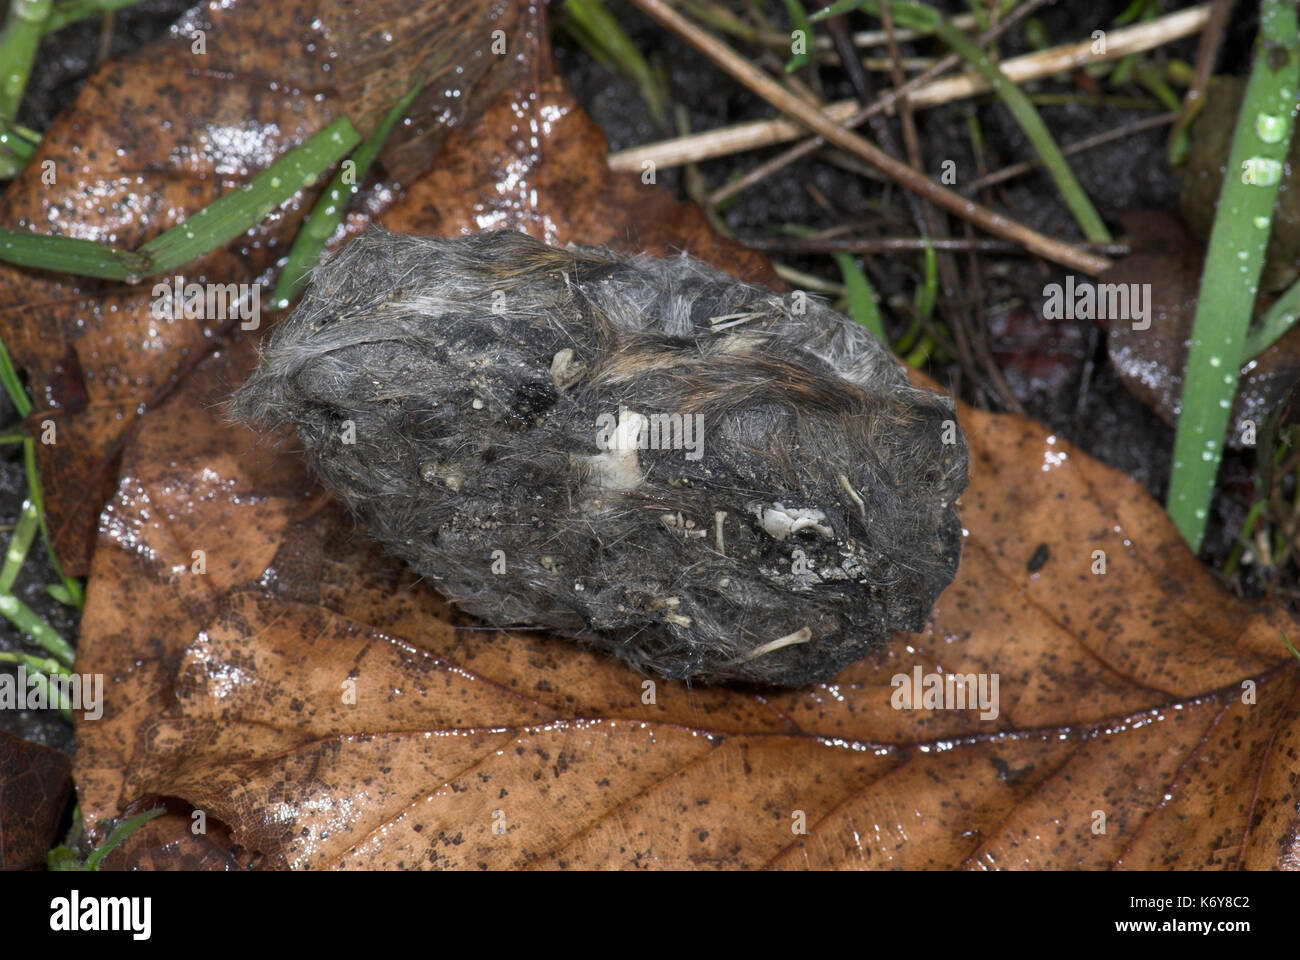 Barn Owl Pellet, showing fur and bones of eaten and partially digested mammal, UK, on ground Stock Photo